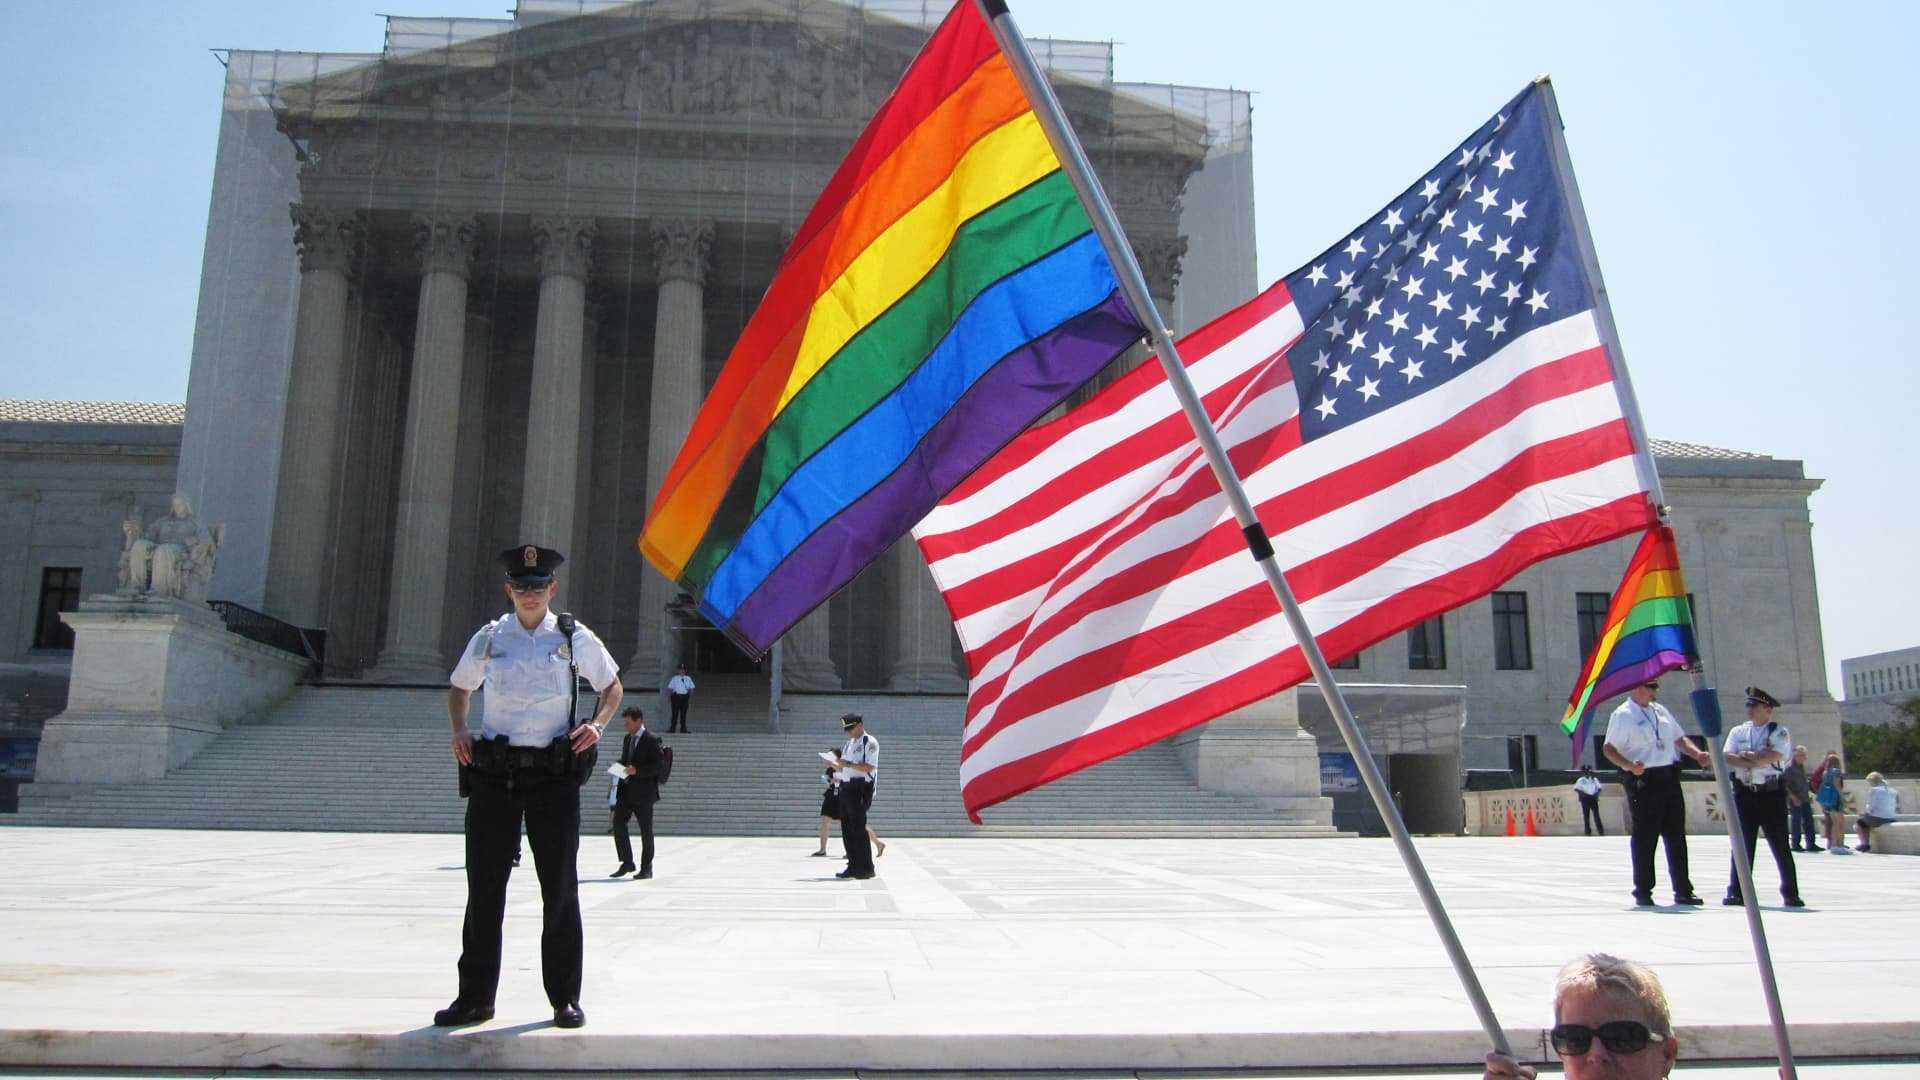 Supreme Court will soon release a potentially pivotal decision for LGBT rights